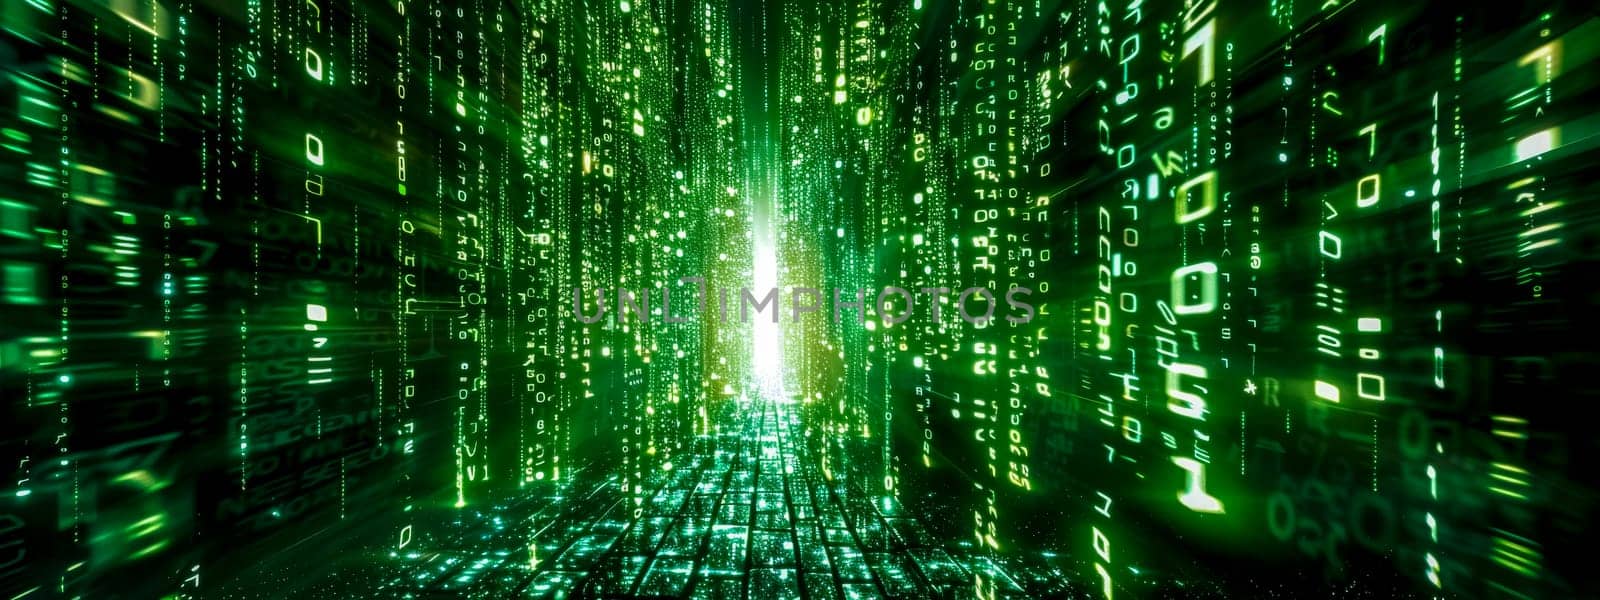 Vibrant green binary code streaming in a 3d digital tunnel symbolizing data flow